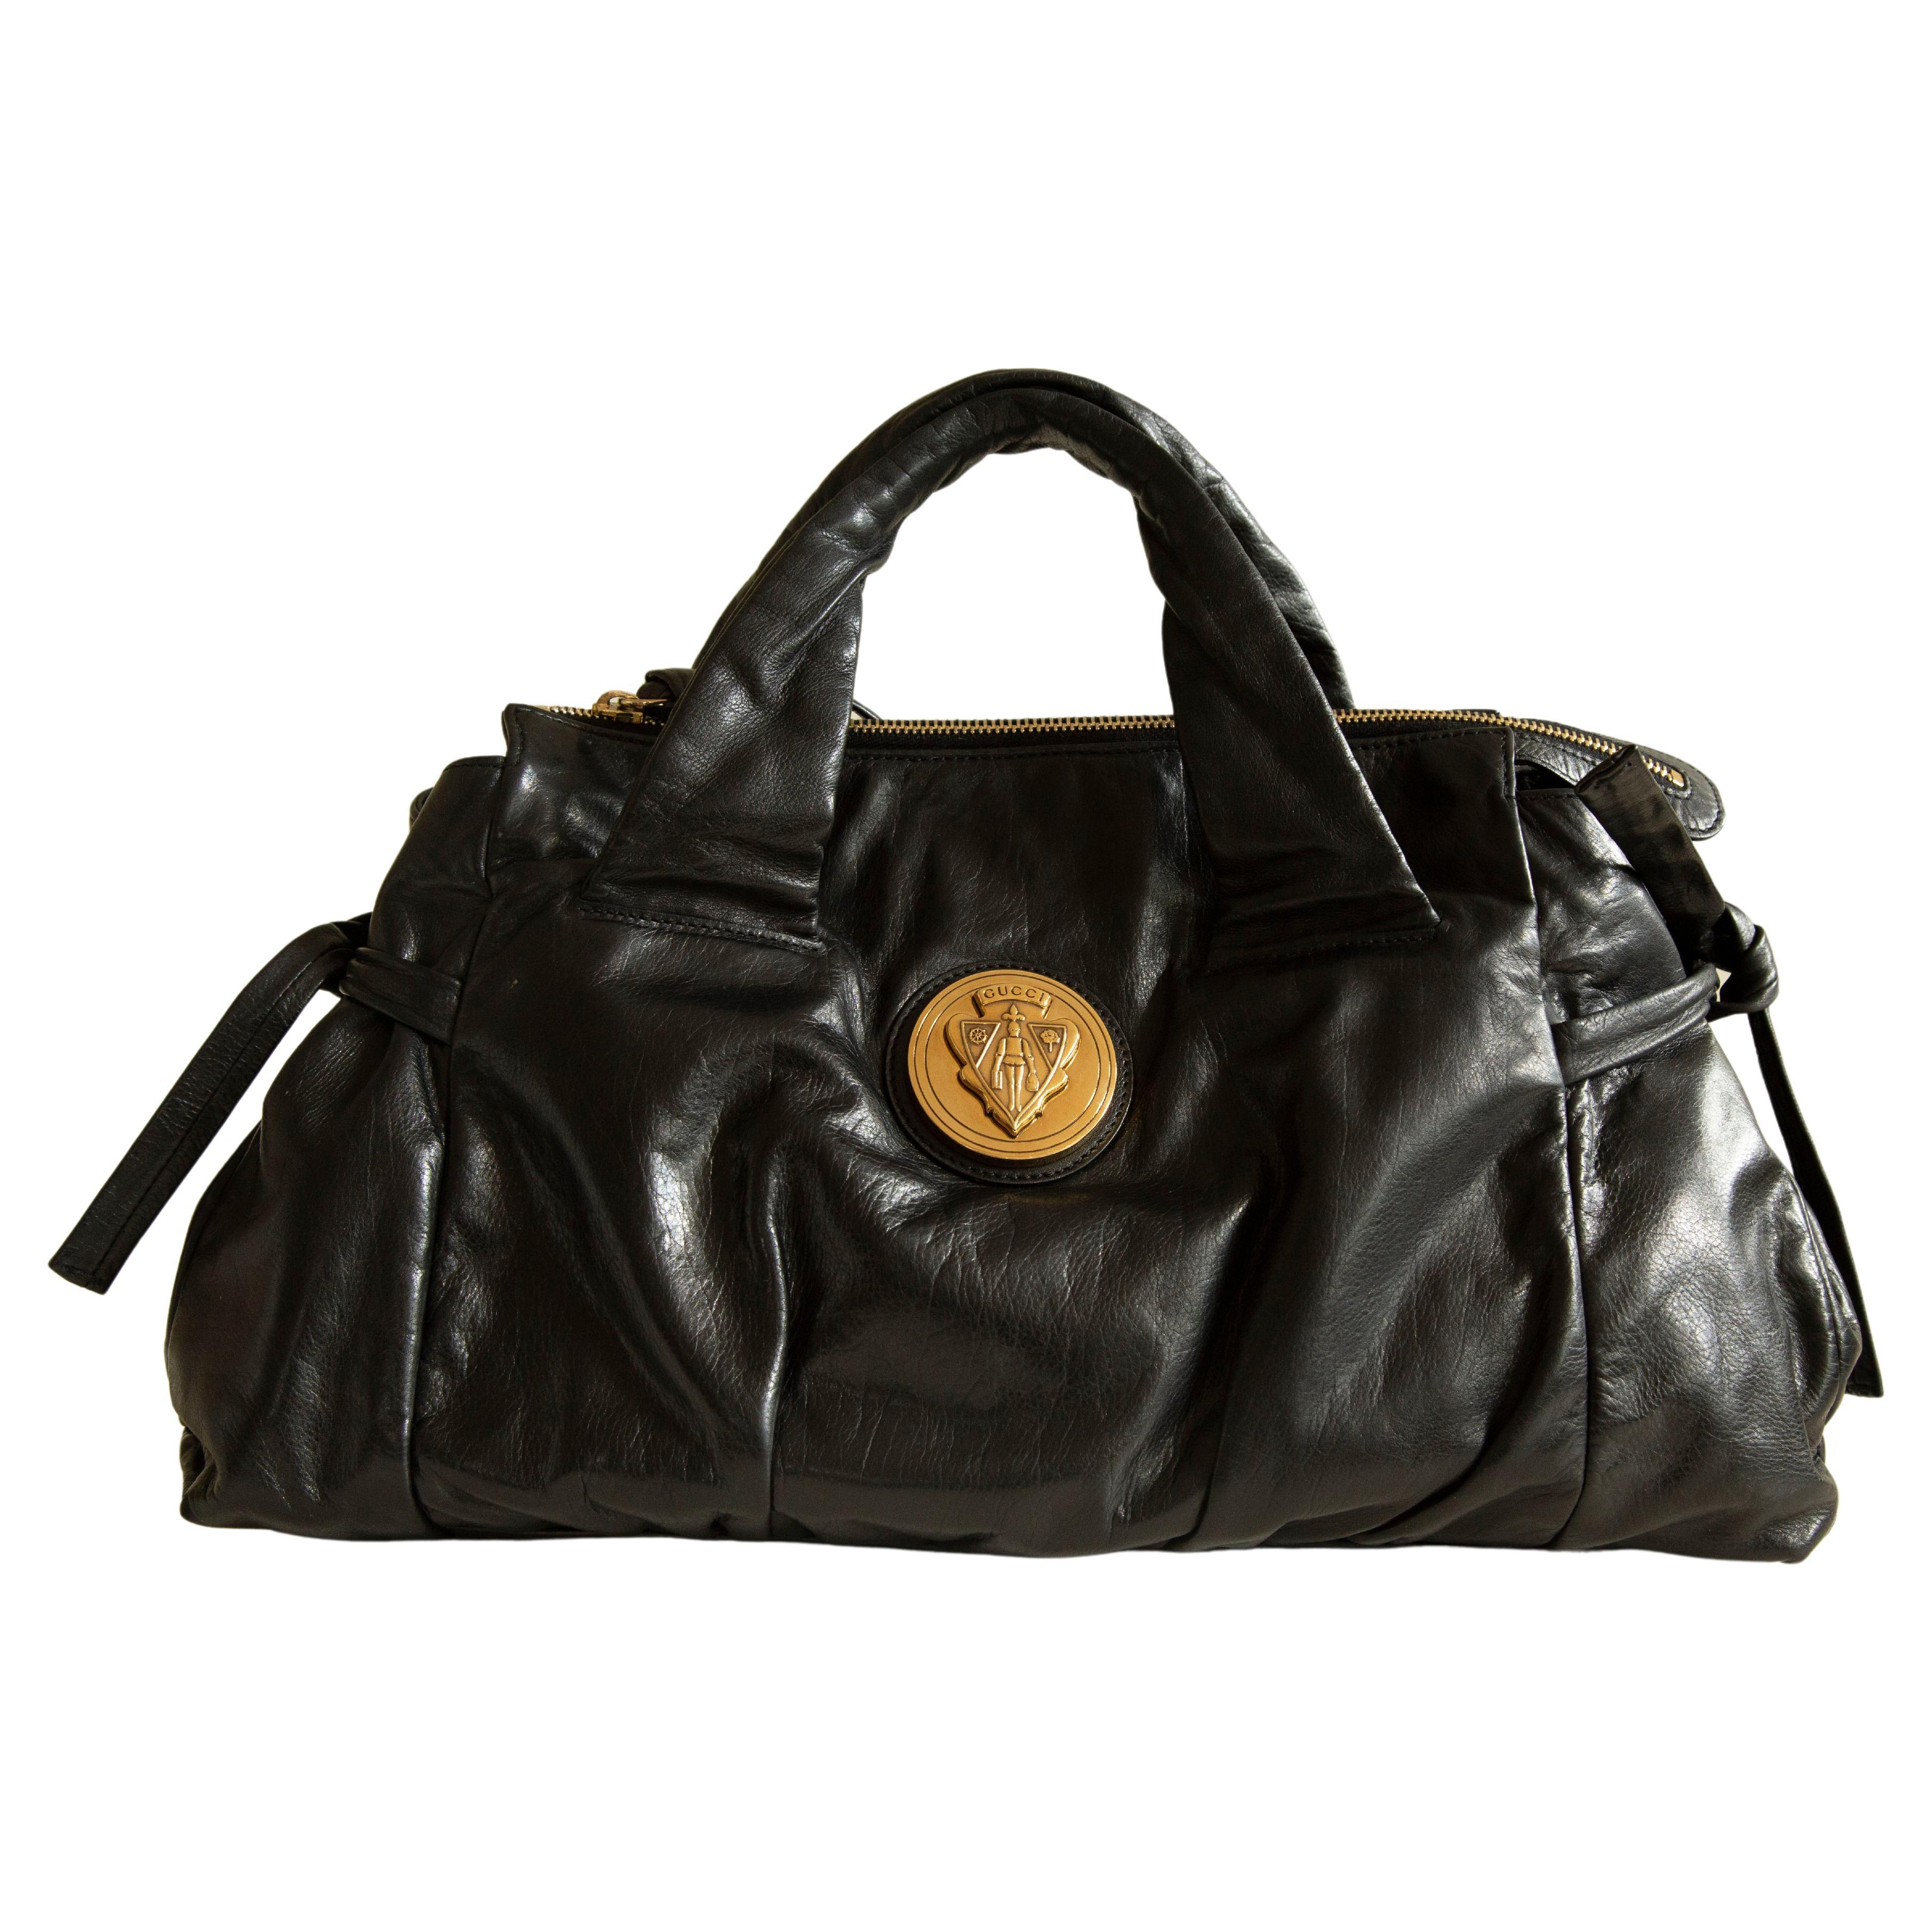 Gucci Hysteria 2000s Top Handle Bag  in Black Shiny Leather For Sale